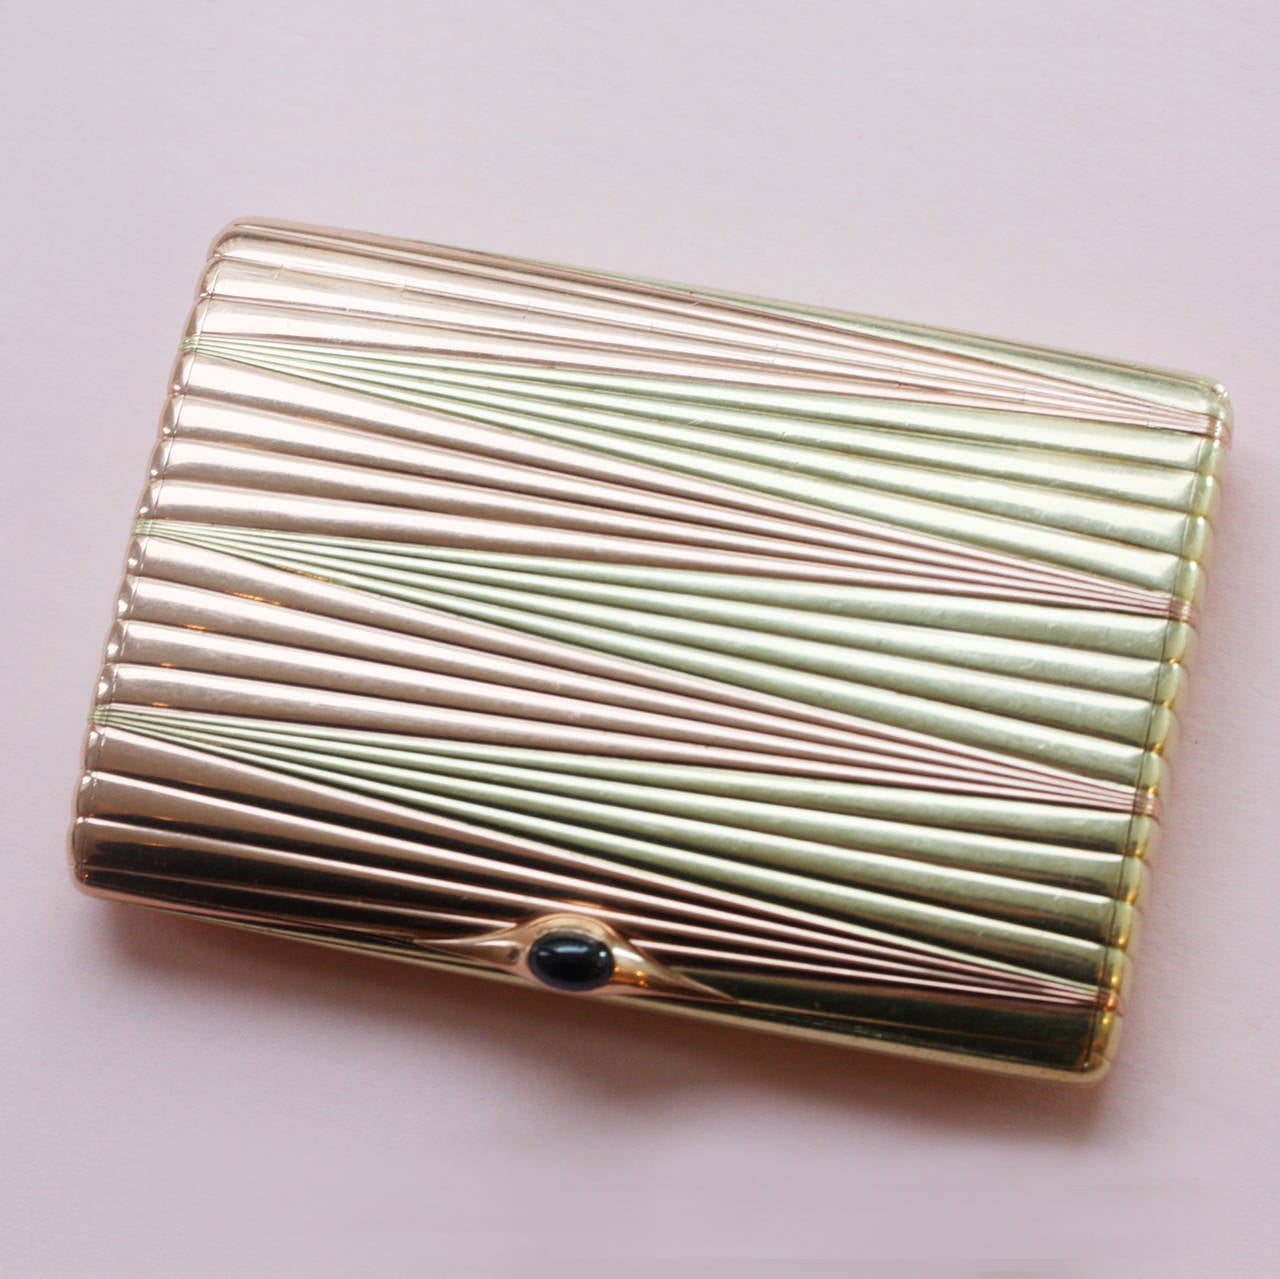 A rectangular two colored gold 14 carat gold cigarette box with rounded corners, the hinged lid set with a cabochon cut sapphire thumb piece, the surface chased with a reeded sunburst motif, the pink gold juxtaposed with yellow gold, which gives the